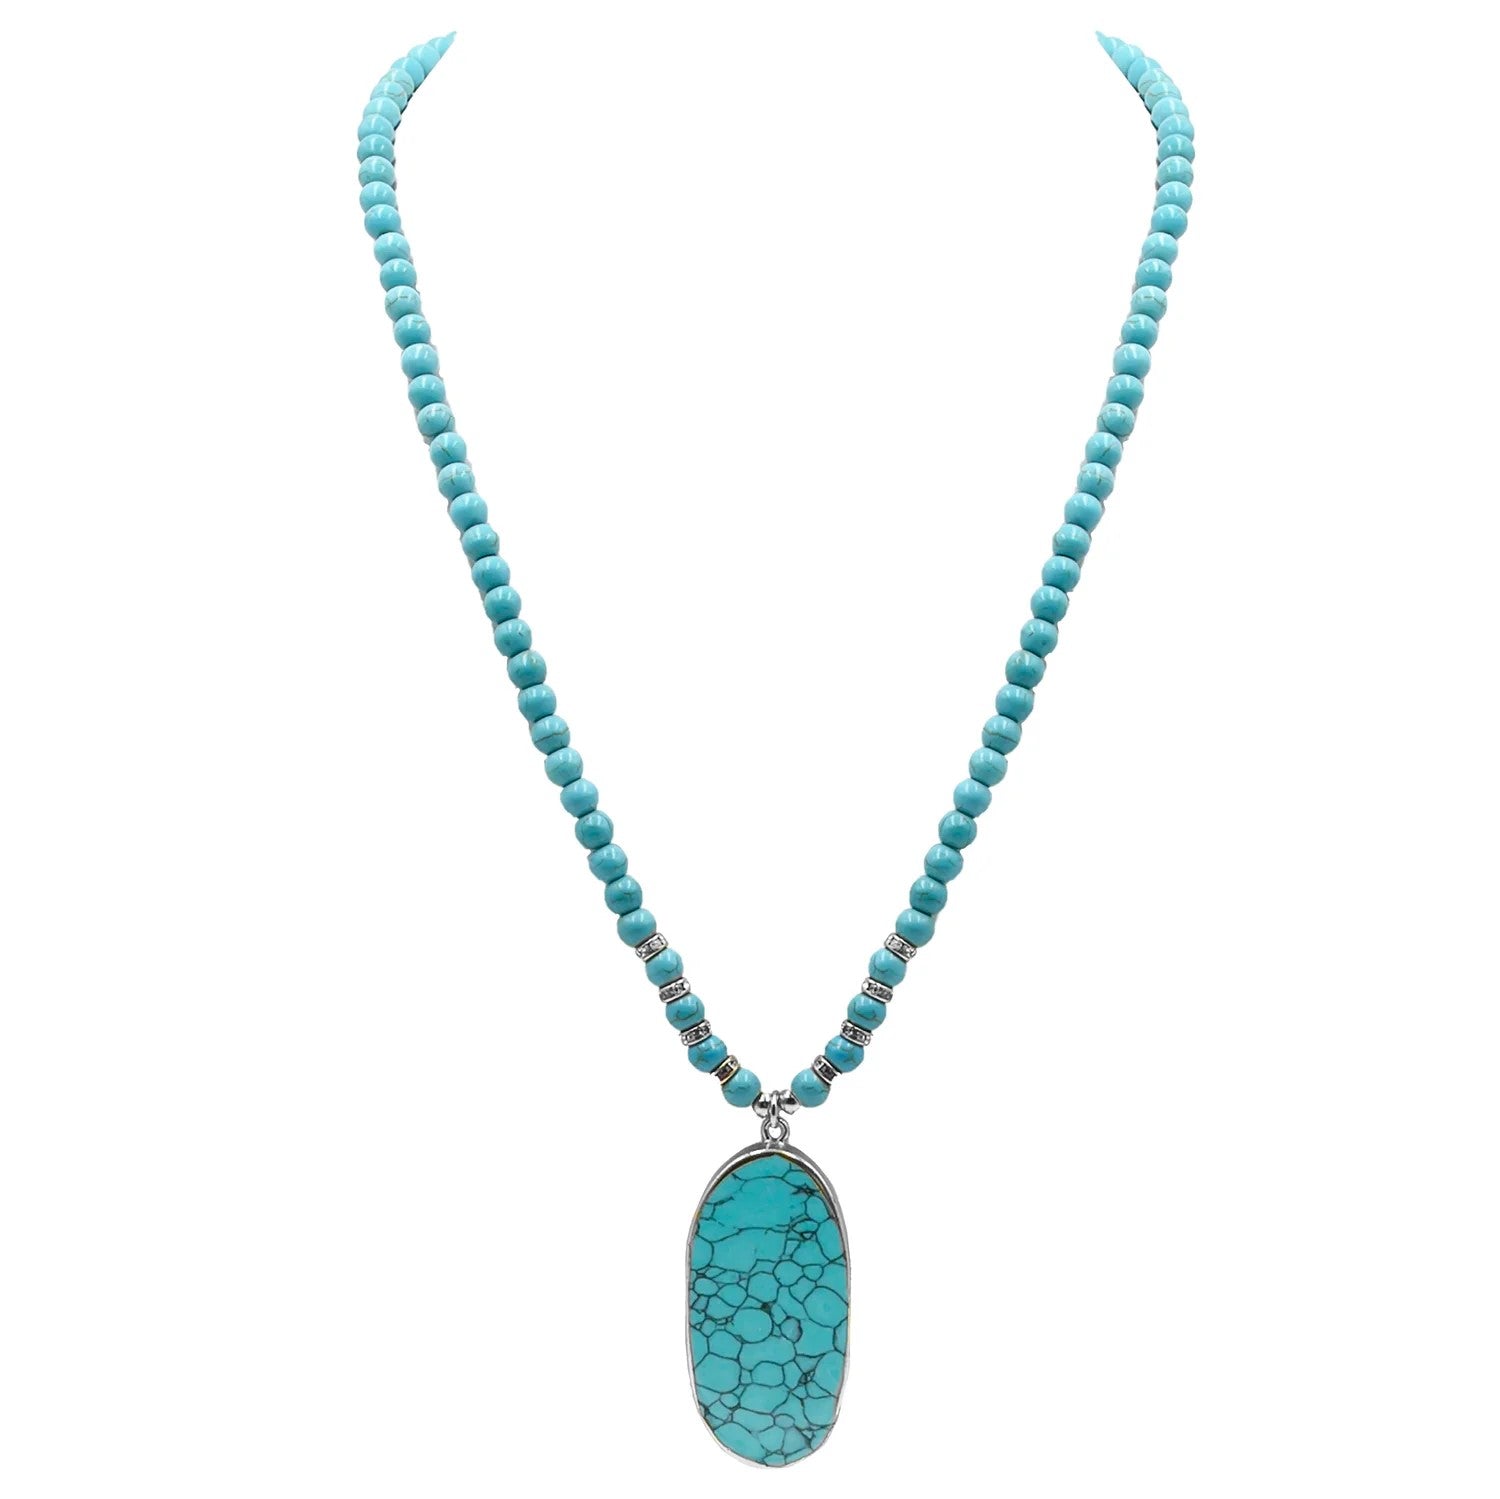 Kinsley Armelle - Montana Collection - Silver Turquoise Necklace - 32 Inch